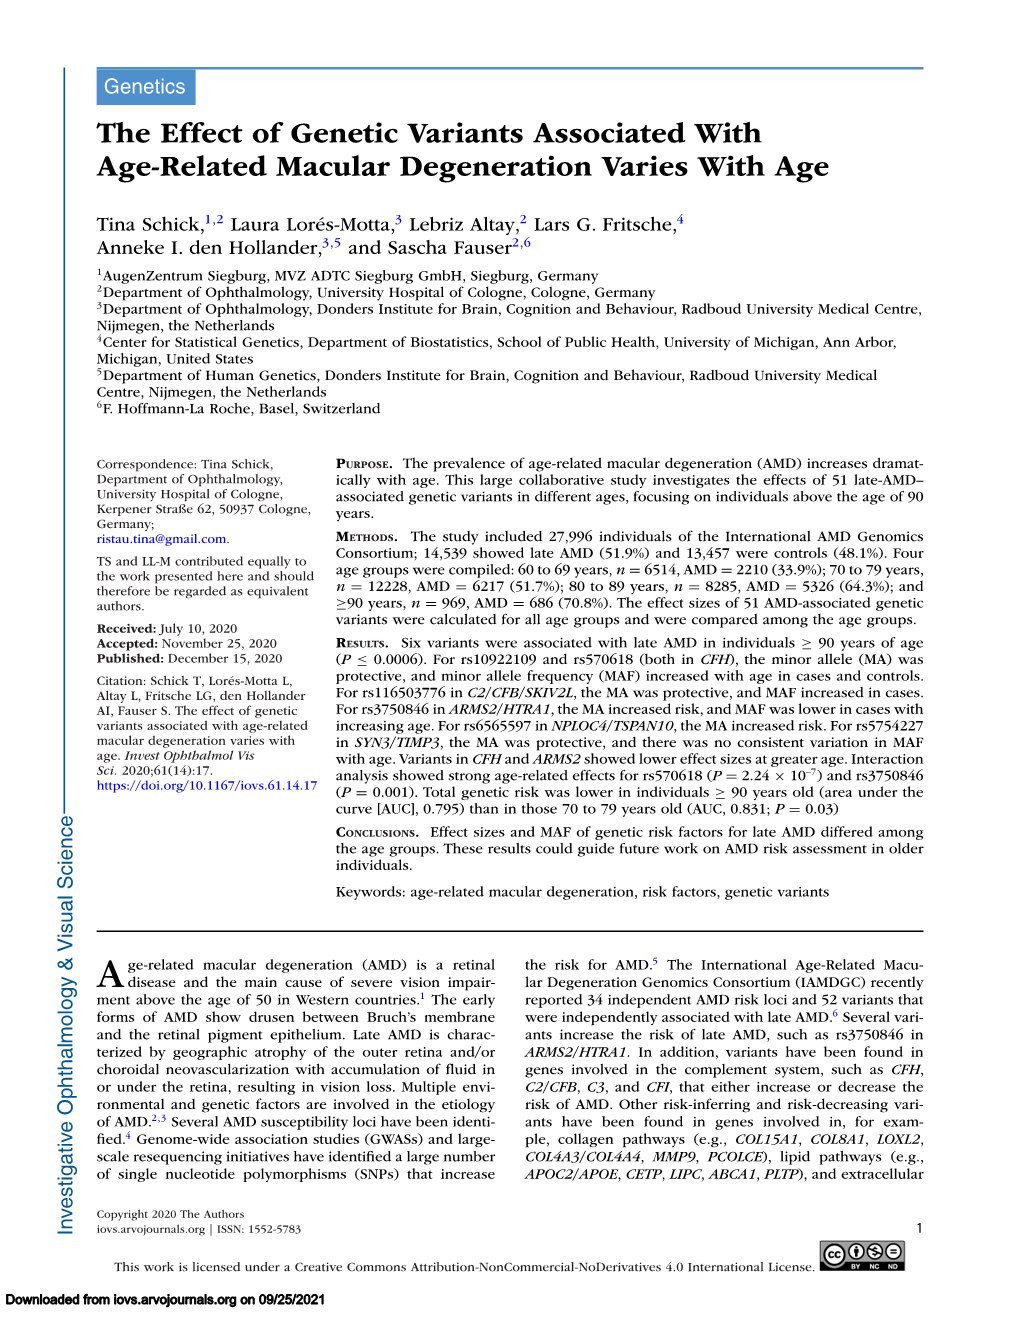 The Effect of Genetic Variants Associated with Age-Related Macular Degeneration Varies with Age